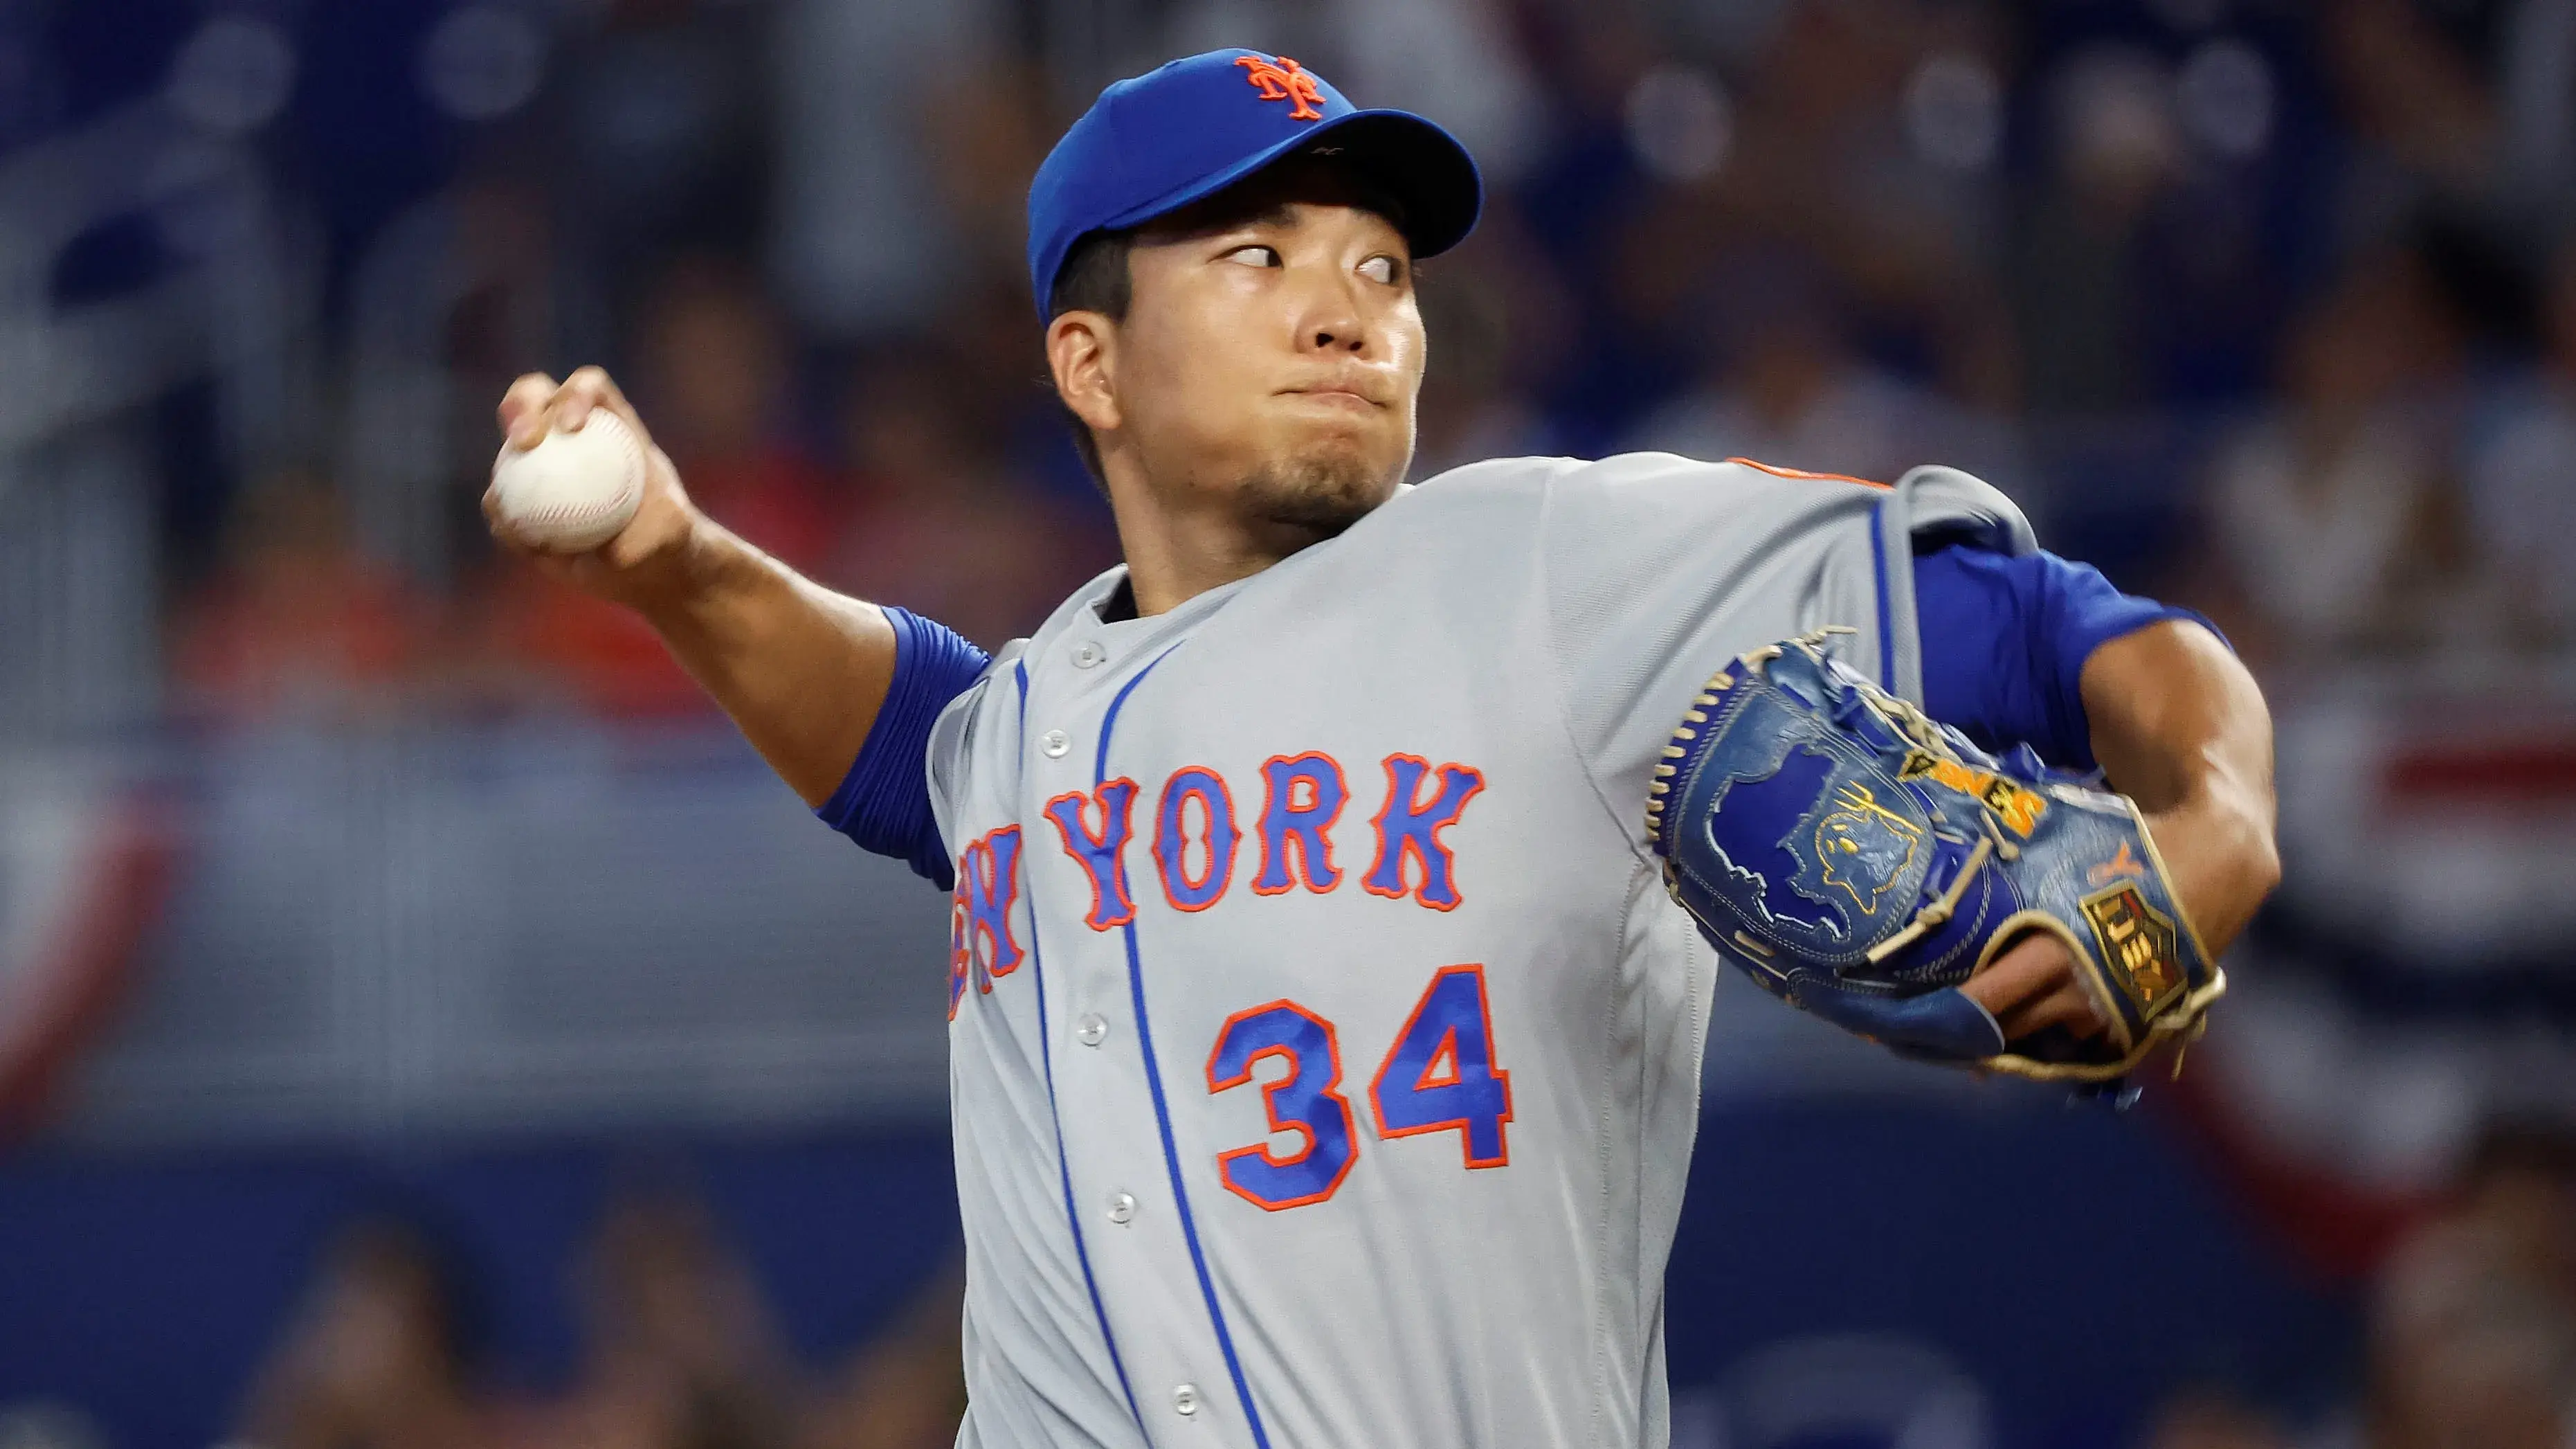 Apr 2, 2023; Miami, Florida, USA; New York Mets starting pitcher Kodai Senga (34) pitches against the Miami Marlins in the first inning at loanDepot Park. Mandatory Credit: Rhona Wise-USA TODAY Sports / © Rhona Wise-USA TODAY Sports